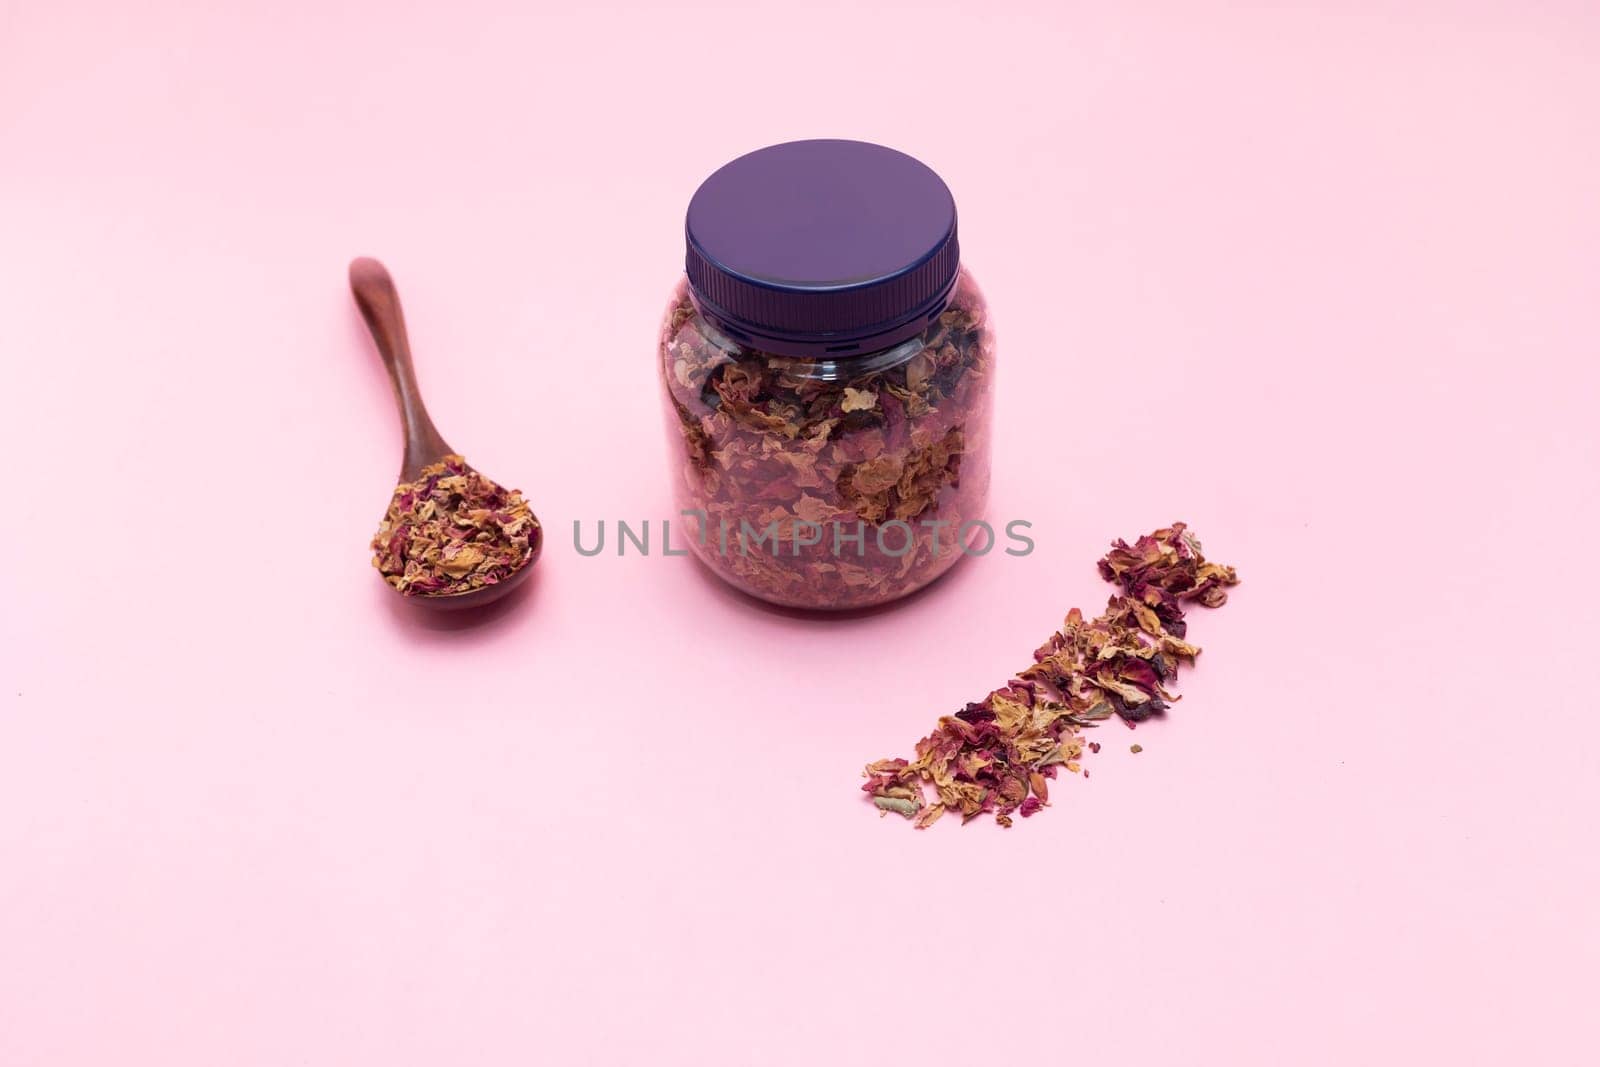 Jar, container with dry roses petals, leaves. Wooden spoon filled with dried roses on pink background. Aromatic herbal beverage made from fragrant buds of flowers. Top view,flatly horizontal.Copyspace